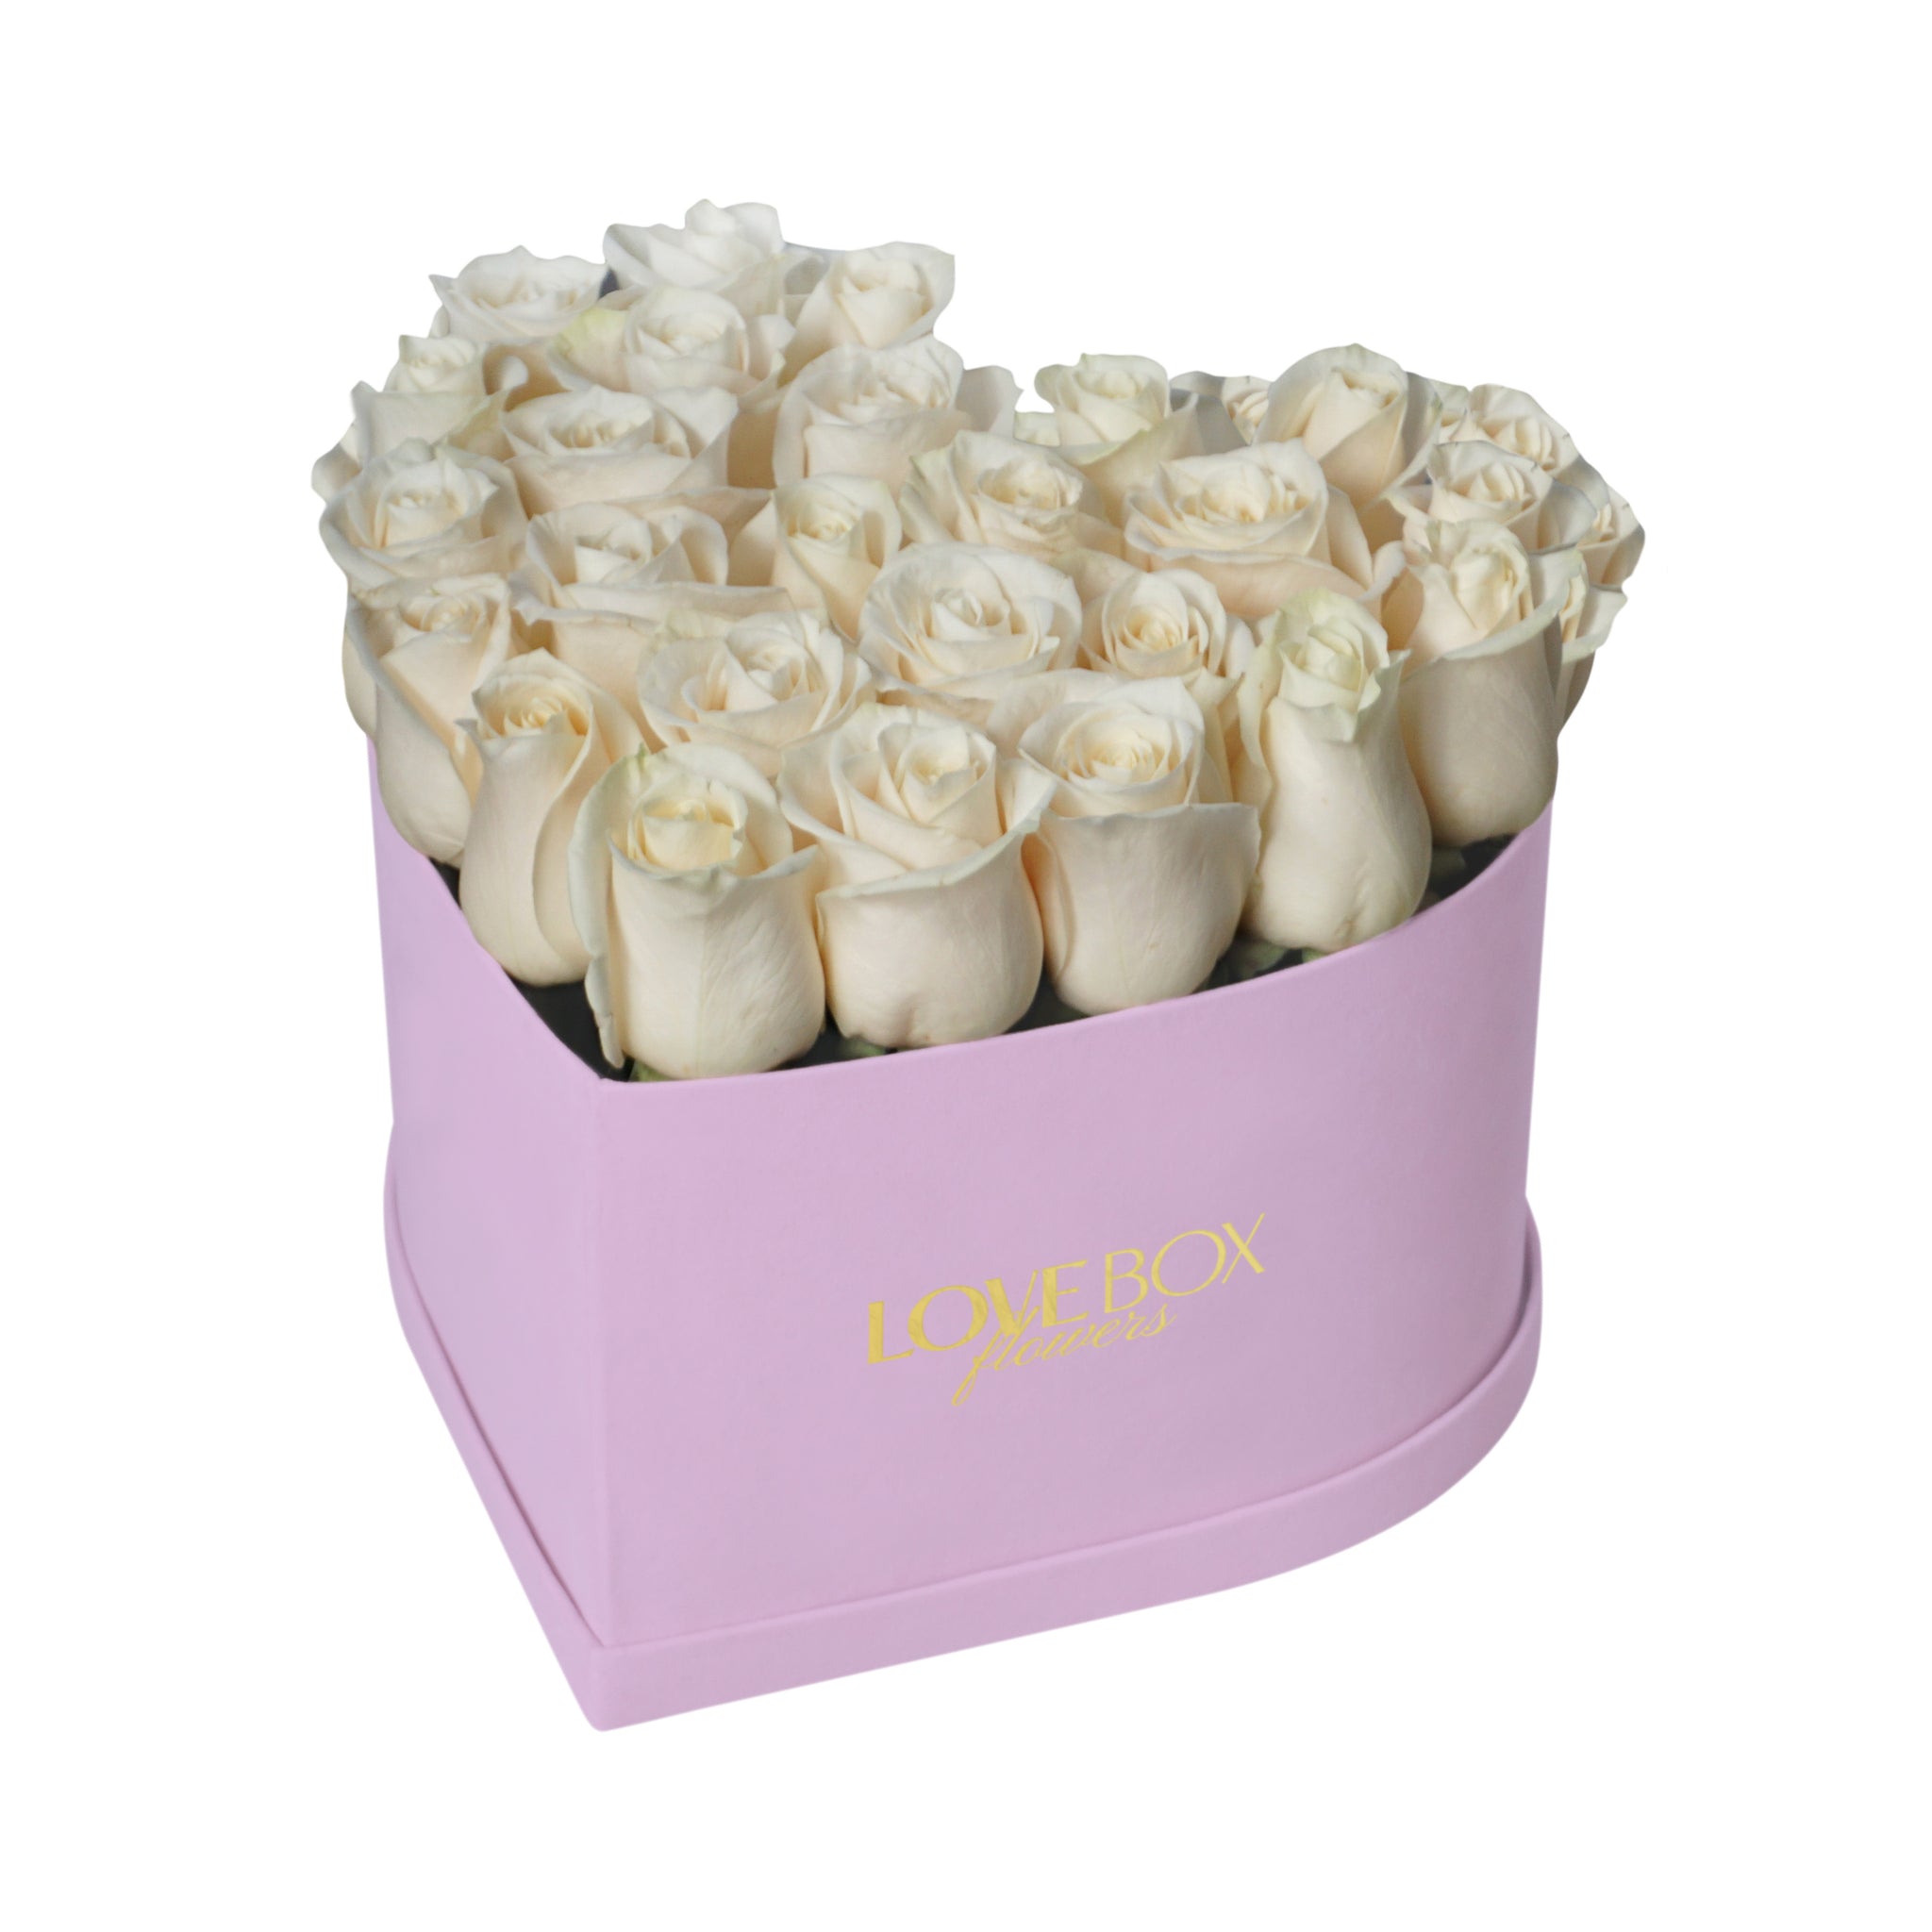 White Roses in Medium Pink Suede Heart Box